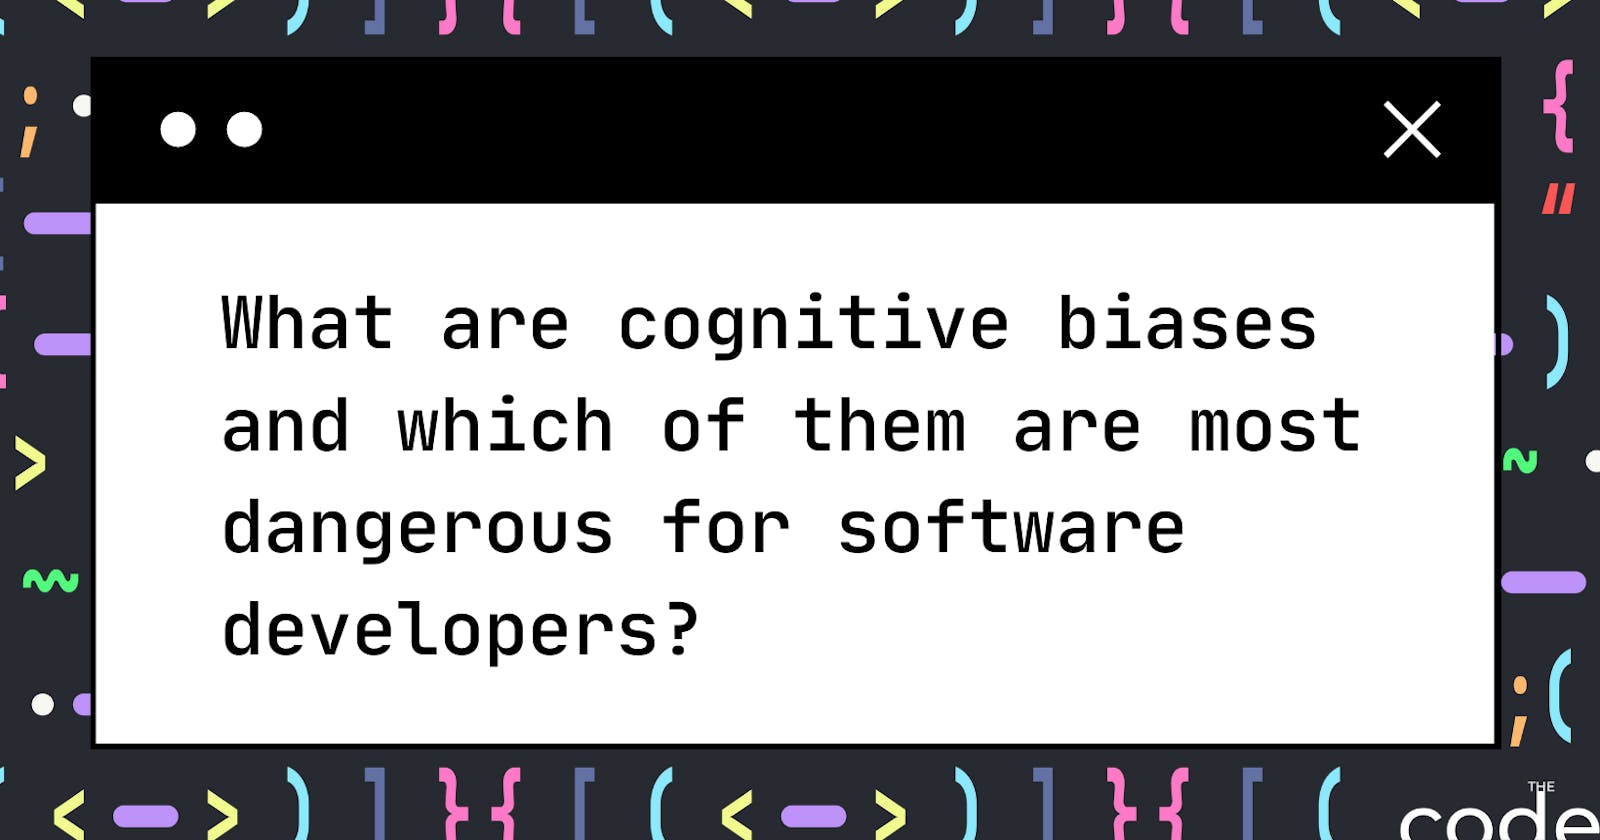 What are cognitive biases and which of them are most dangerous for software developers?